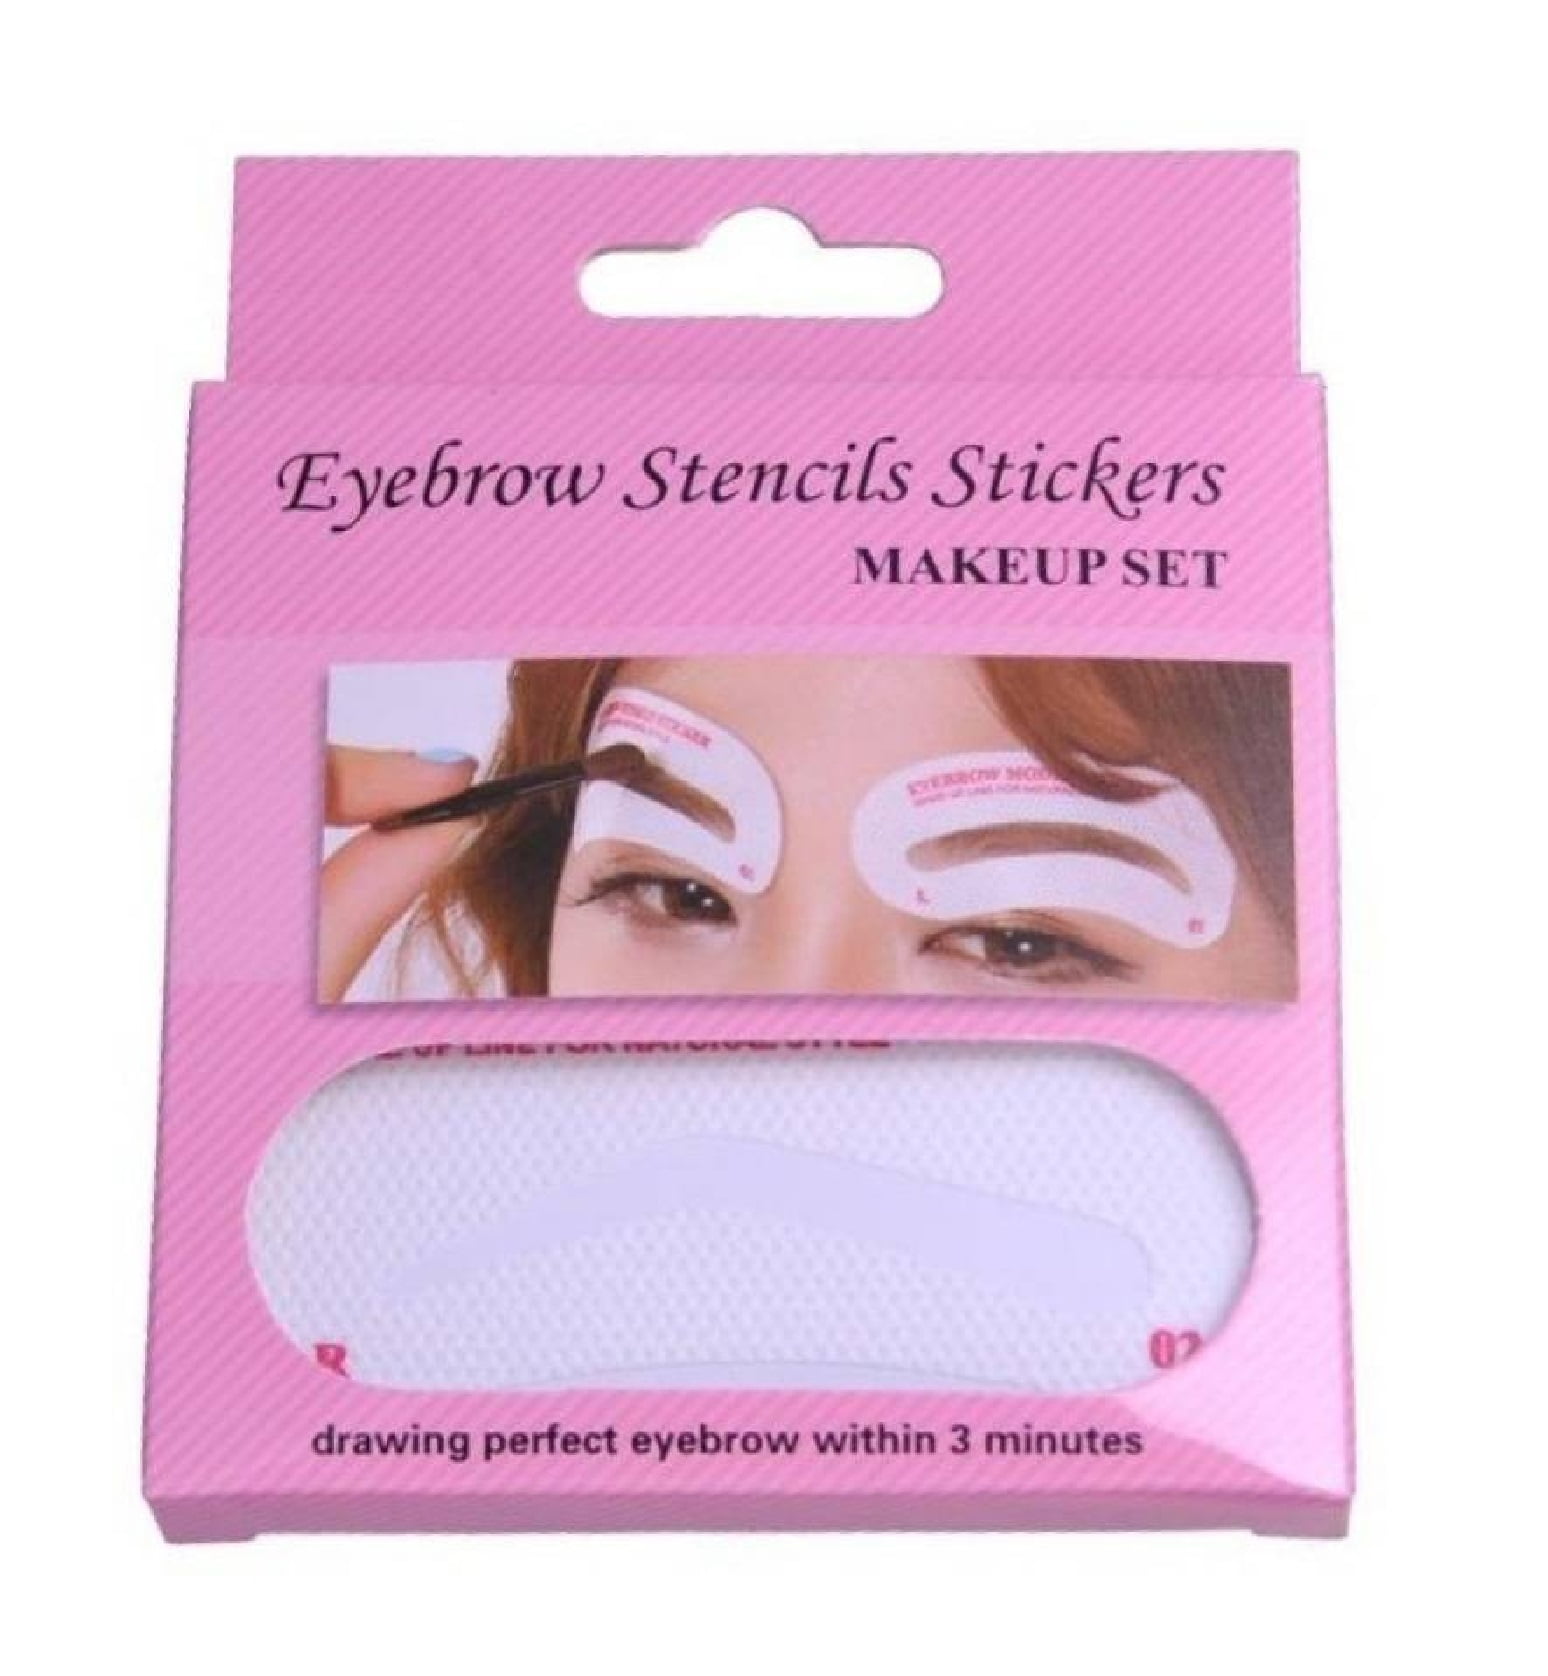 buy-eyebrow-stencil-sticker-set-draw-perfect-eyebrows-in-3-minutes-or